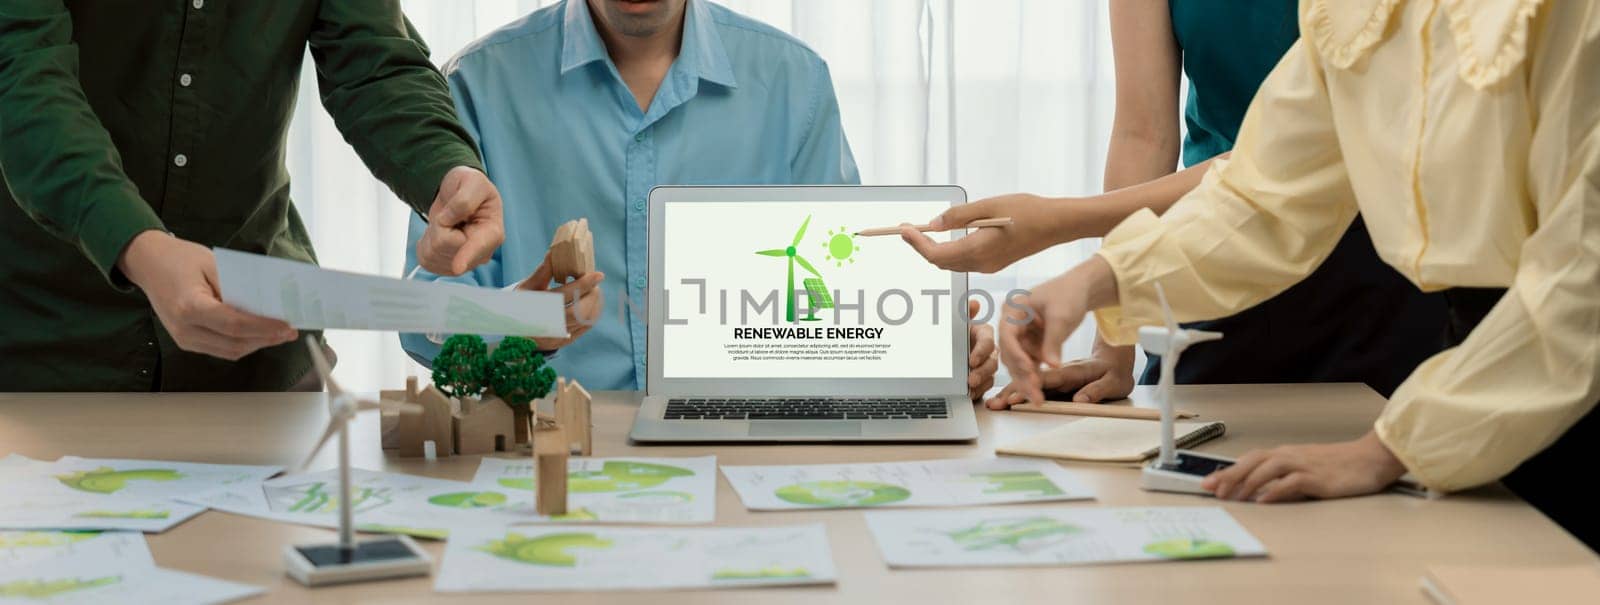 Renewable energy logo displayed on laptop. Eco conservative concept. Delineation by biancoblue